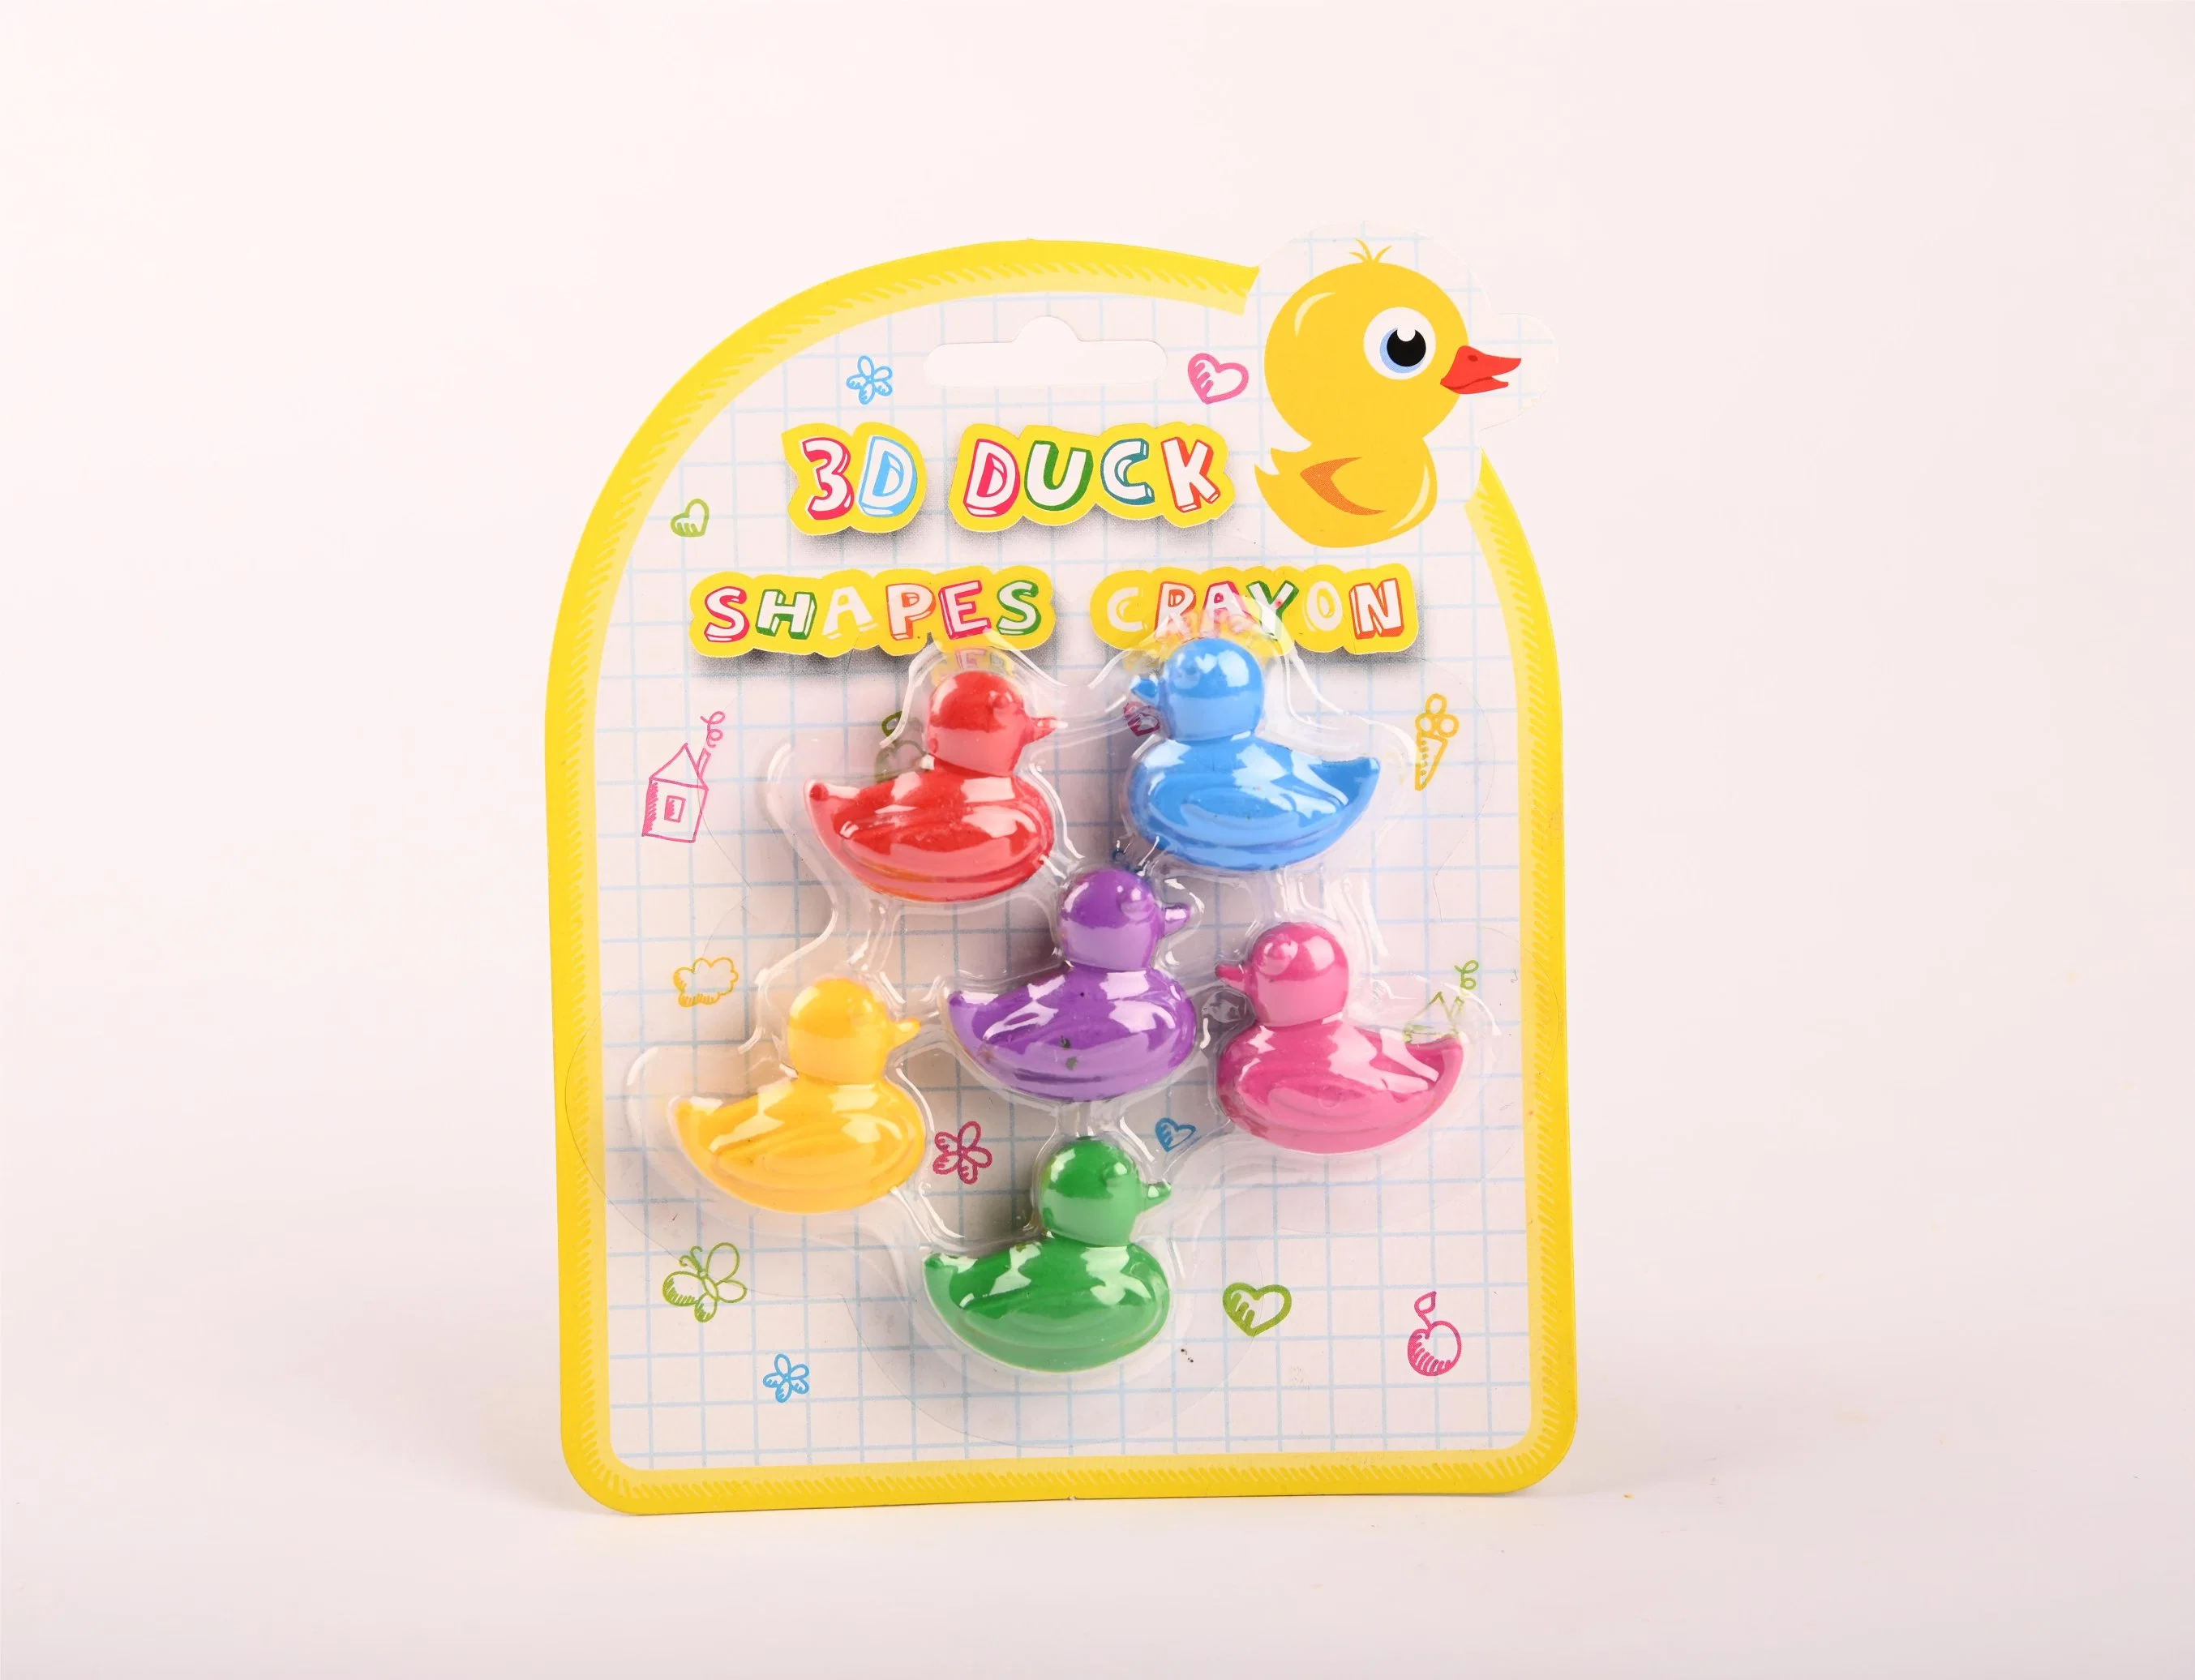 Custom Non-Toxic Children Safety Coloring 3D Duck Shape Crayon